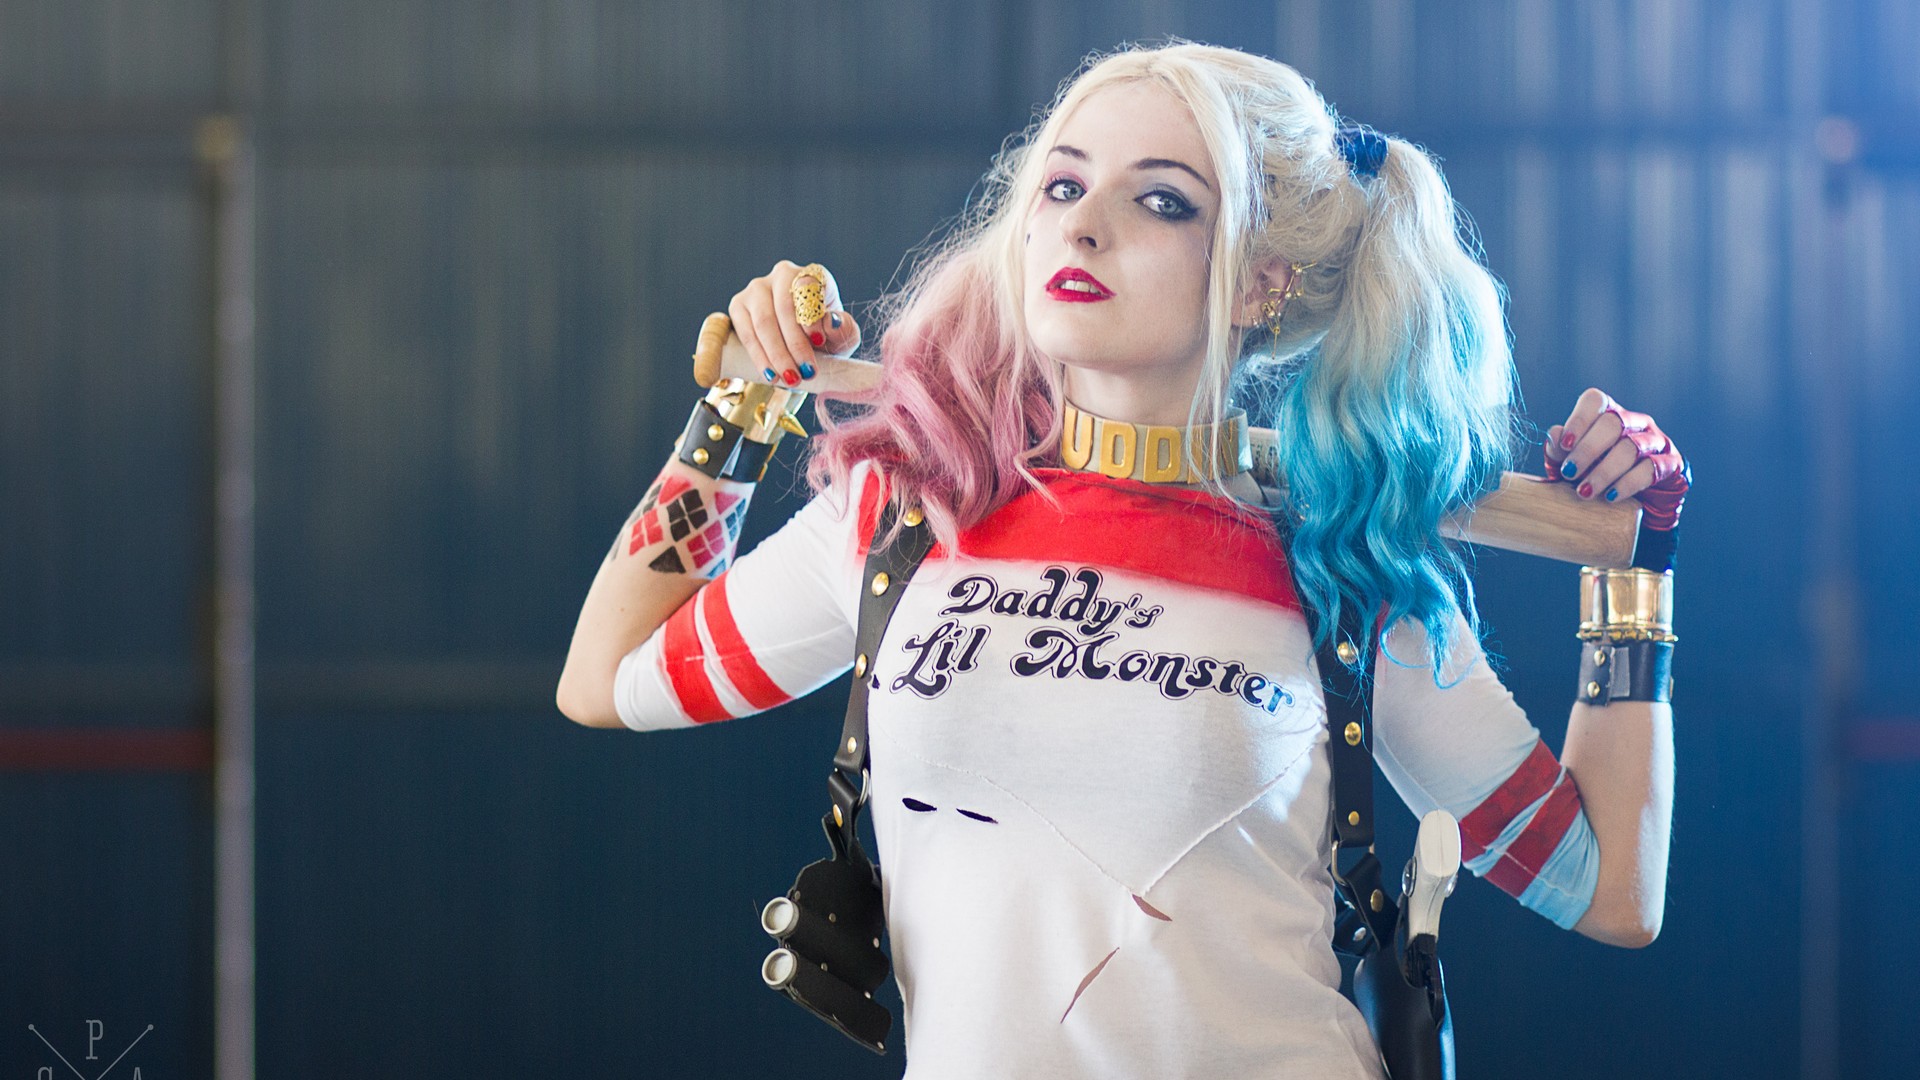 Pictures Of Harley Quinn HD Wallpaper With Resolution 1920X1080 pixel. You can make this wallpaper for your Desktop Computer Backgrounds, Mac Wallpapers, Android Lock screen or iPhone Screensavers